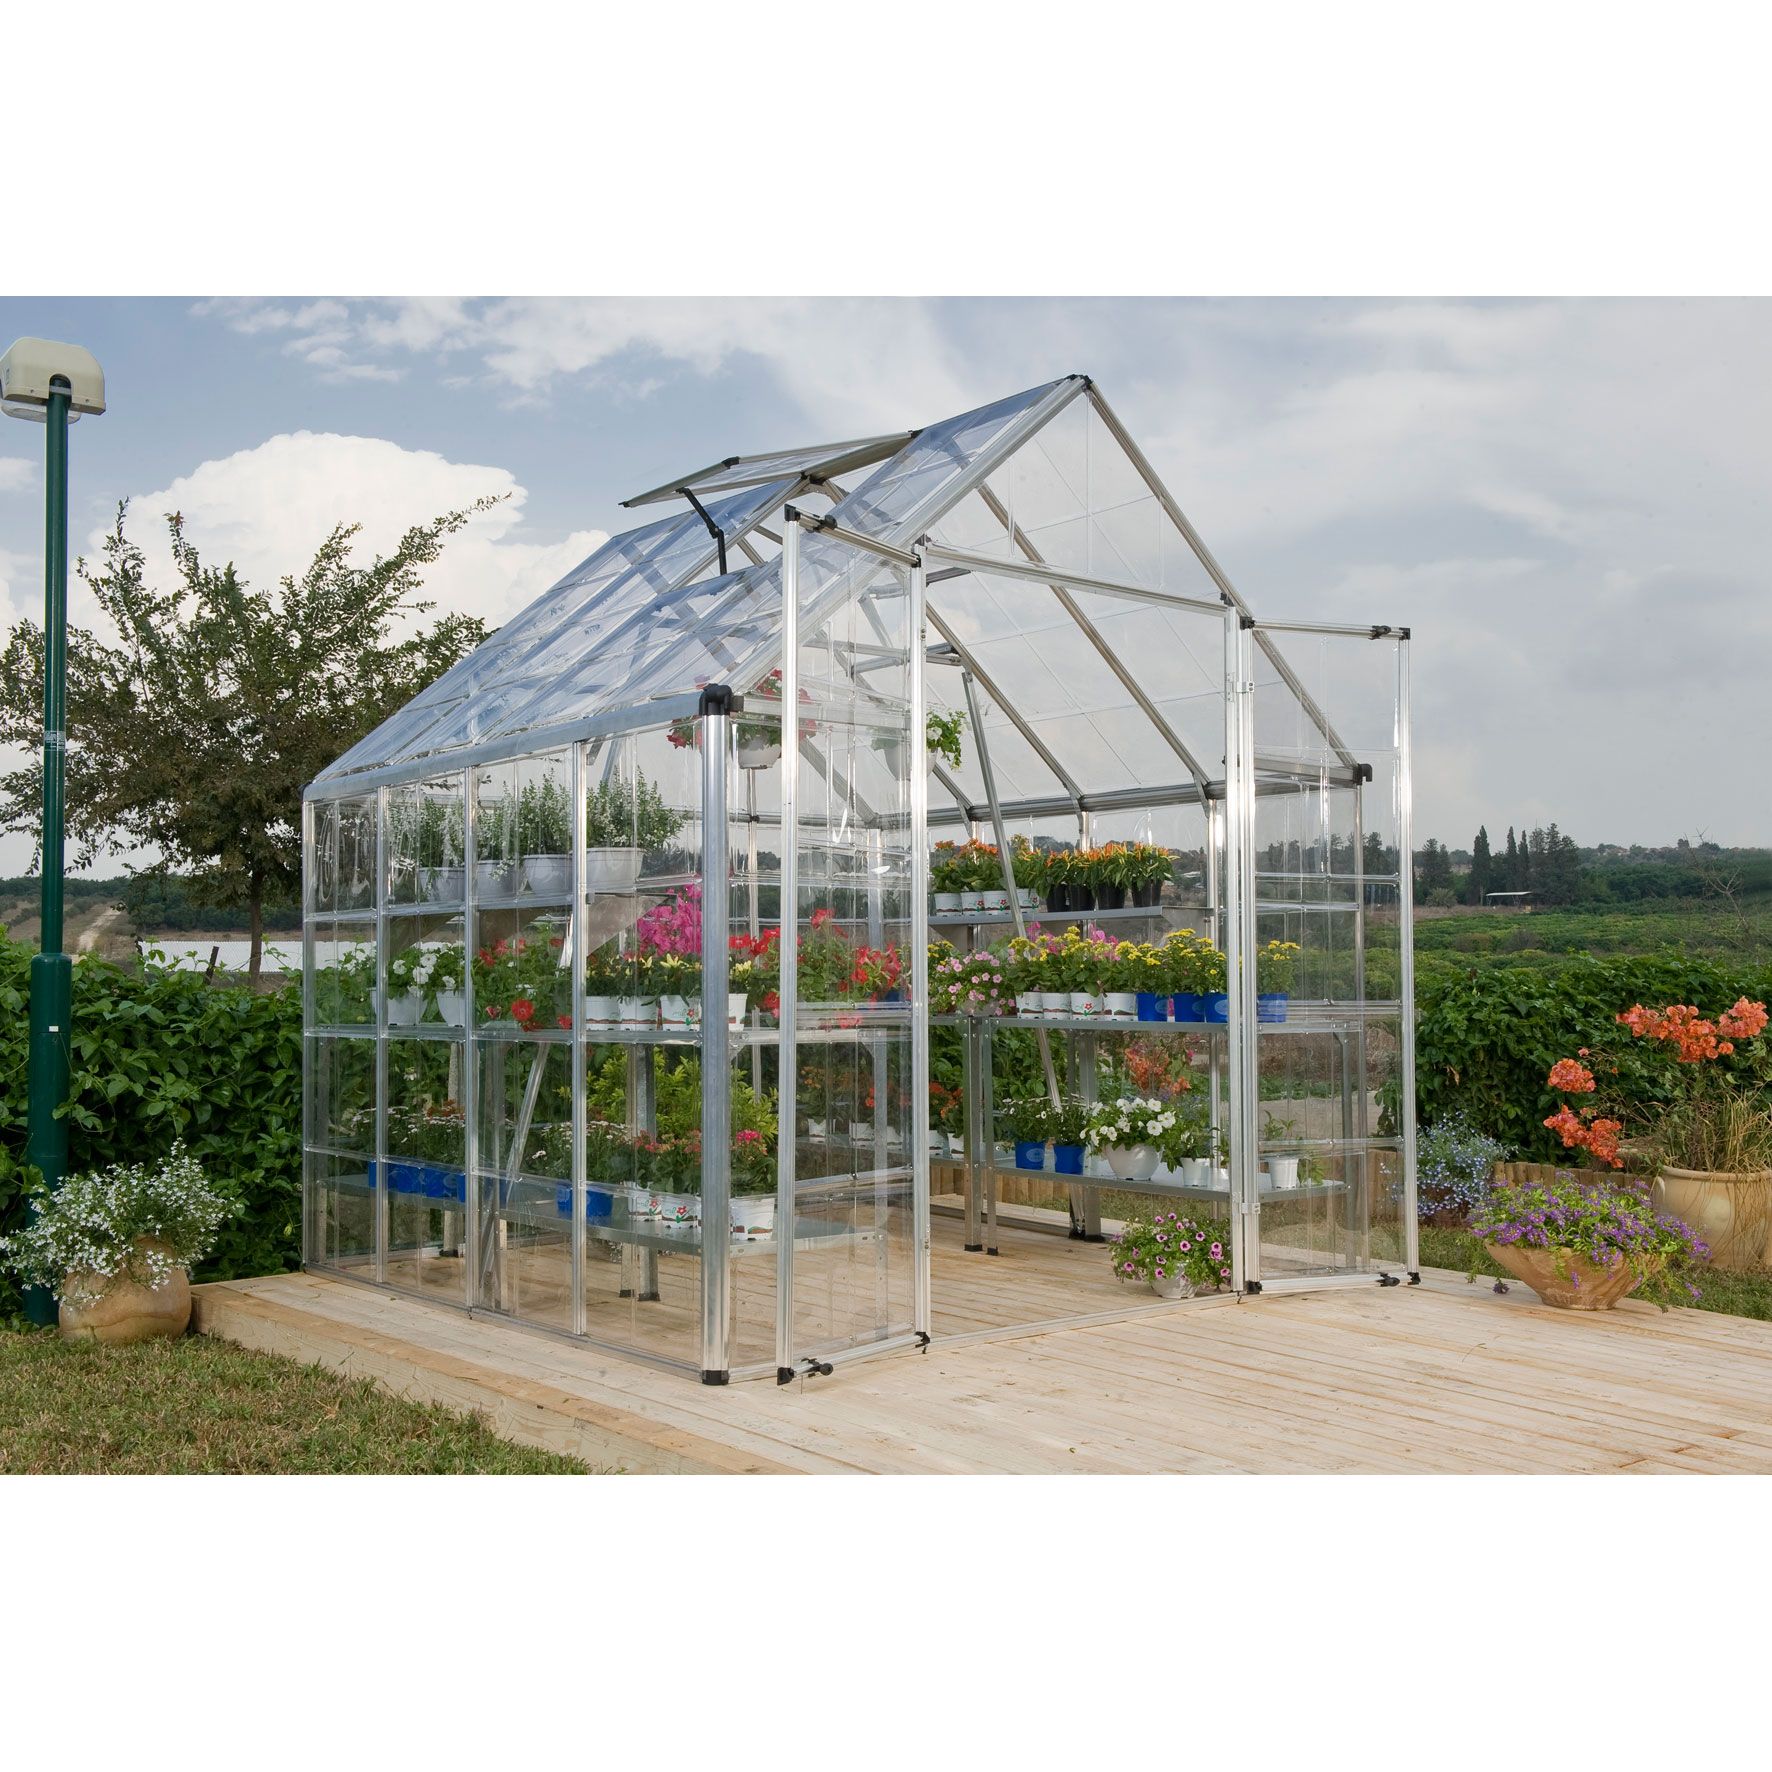 Palram HG8008 Snap and Grow 8 x 8 Greenhouse - Silver